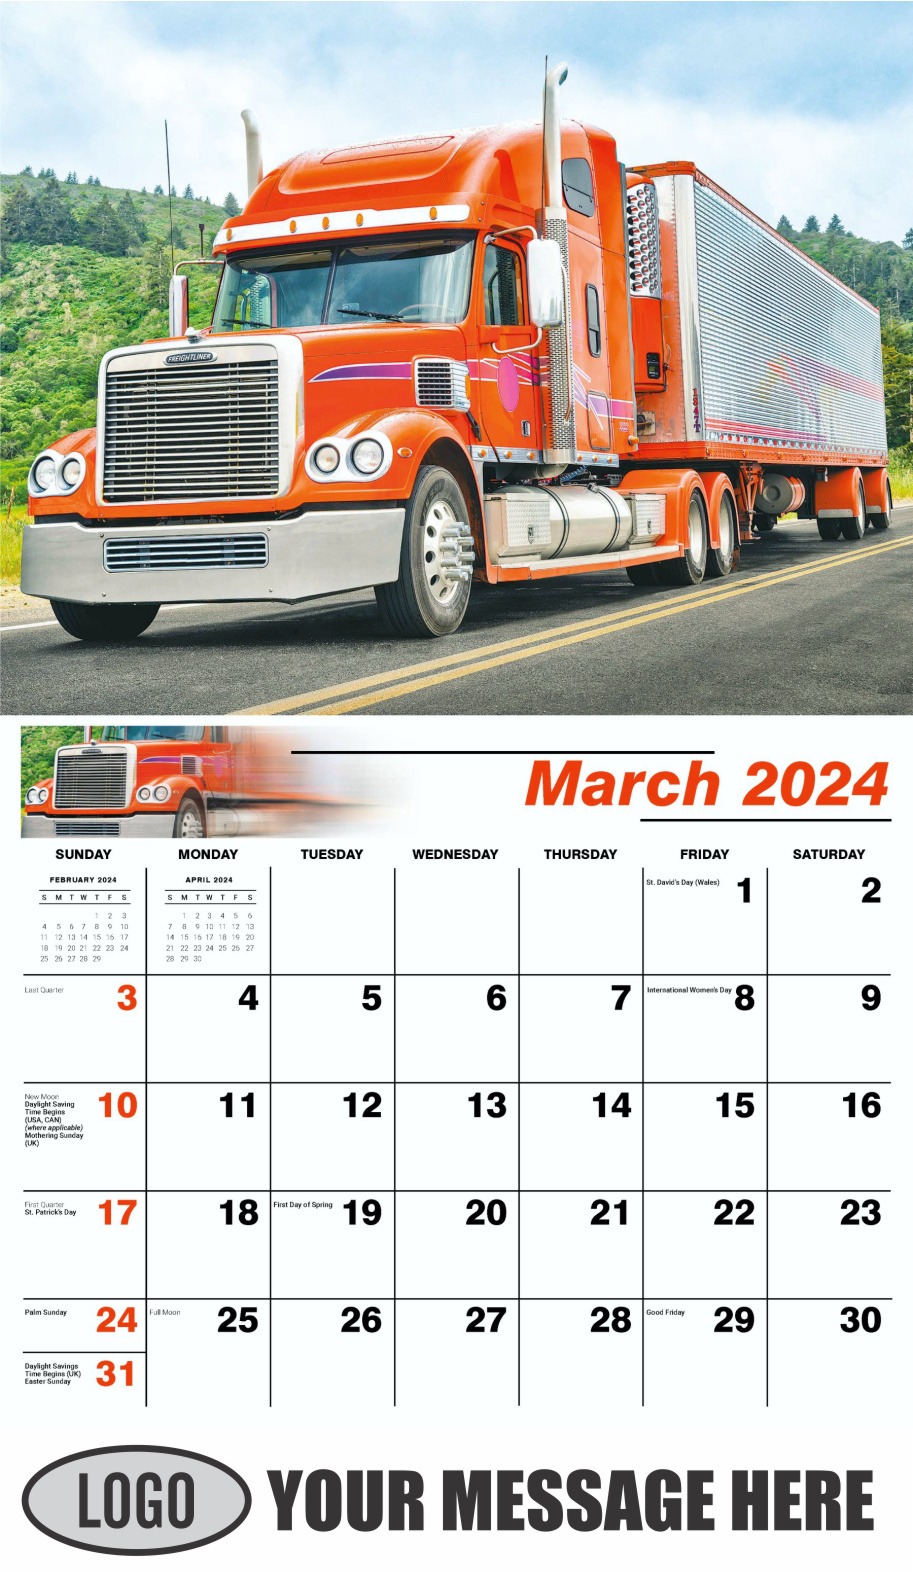 Kings of the Road 2024 Automotive Business Promotional Calendar - March